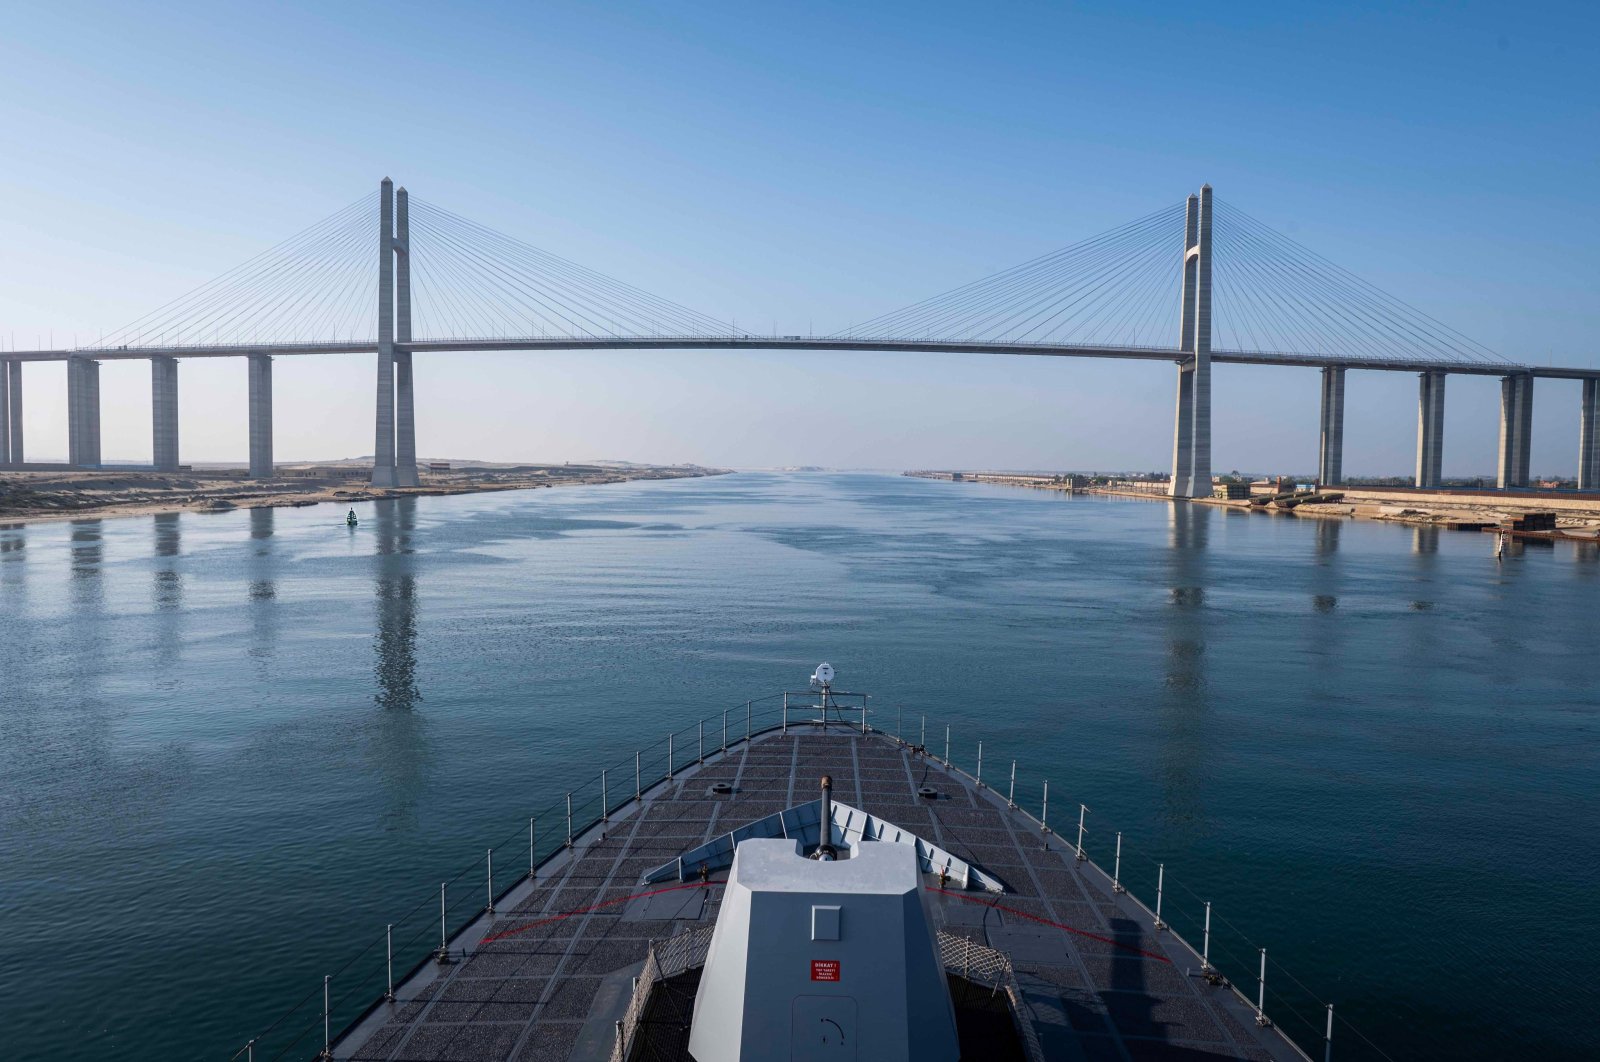 Turkish warship TCG Kınalıada is seen in front of the Suez Canal Bridge, also known as the Egyptian–Japanese Friendship Bridge, Al Salam Bridge, Al Salam Peace Bridge or Mubarak Peace Bridge in this photo released by the Defense Ministry on April 16, 2024. (AA Photo via Defense Ministry)